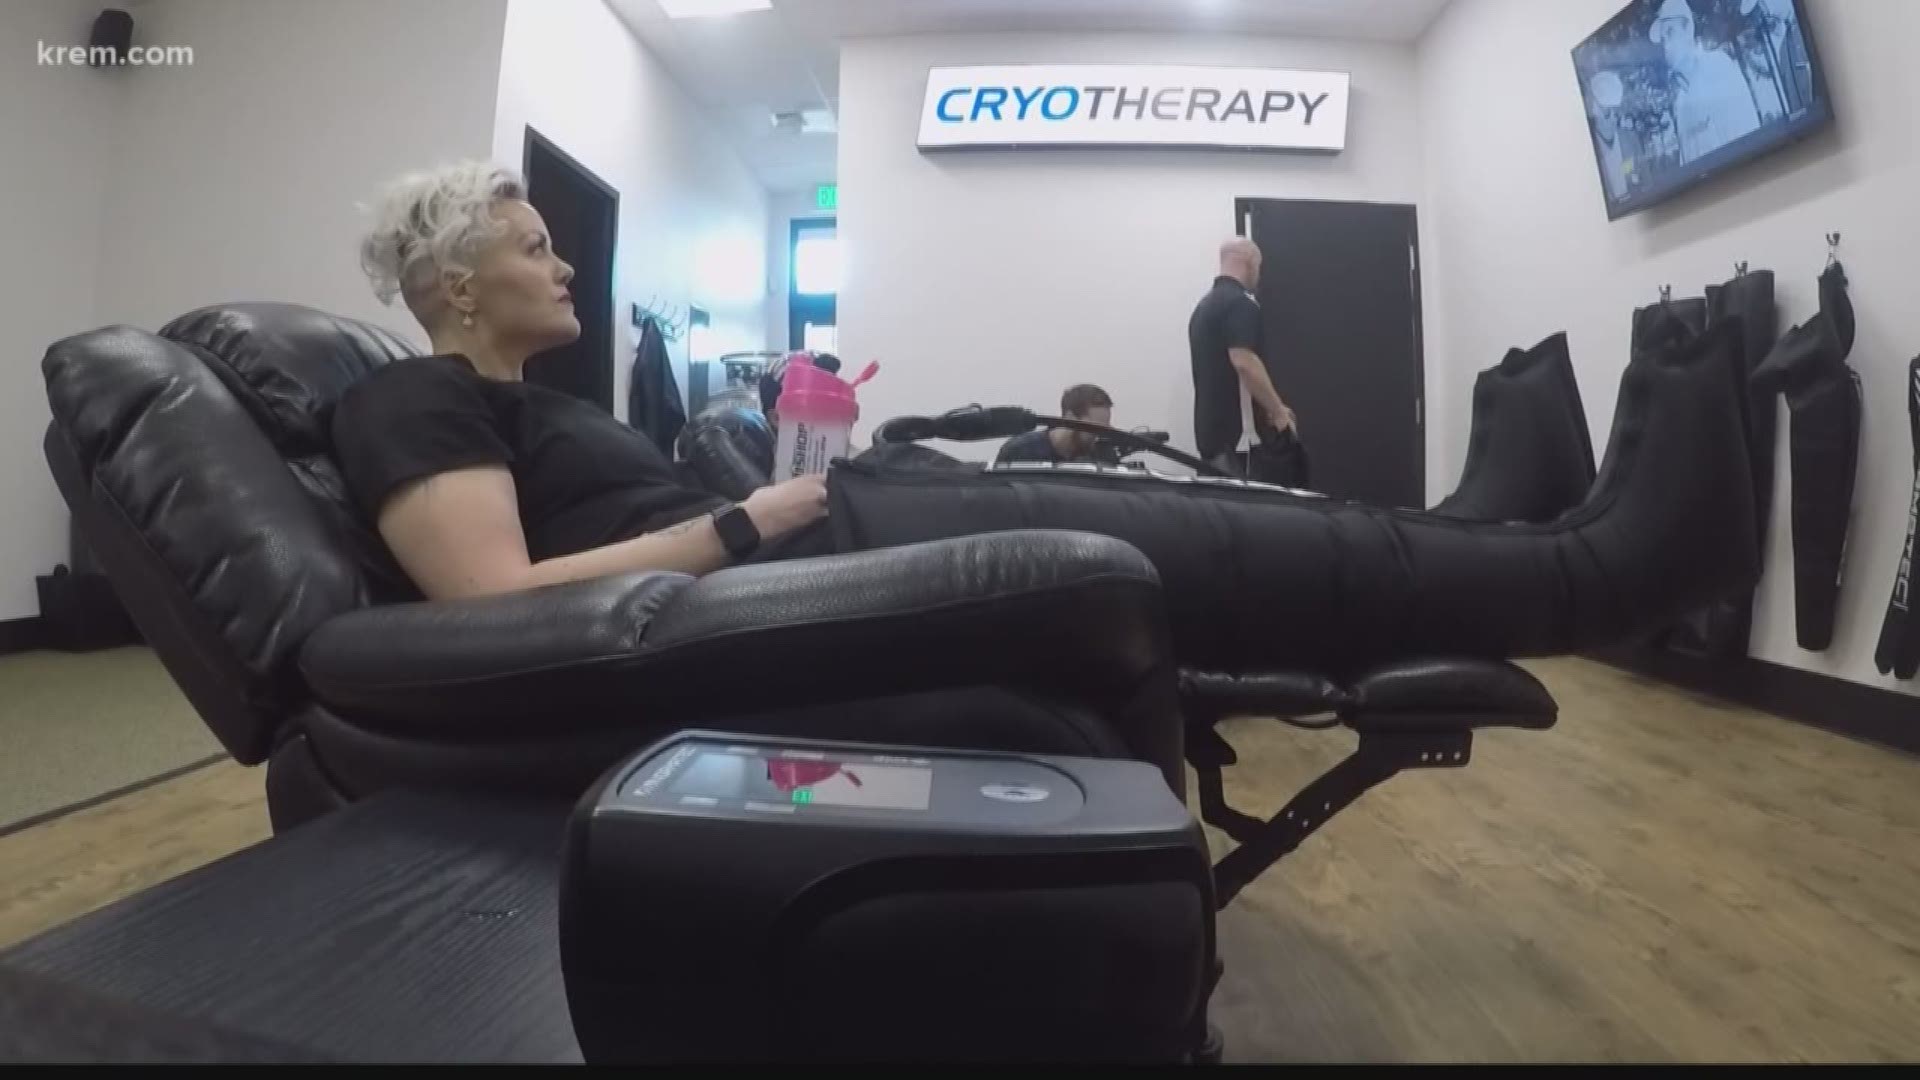 NutiShop and Cryotherapy on the South Hill  talks cryotherapy benefits  (3-27-18)